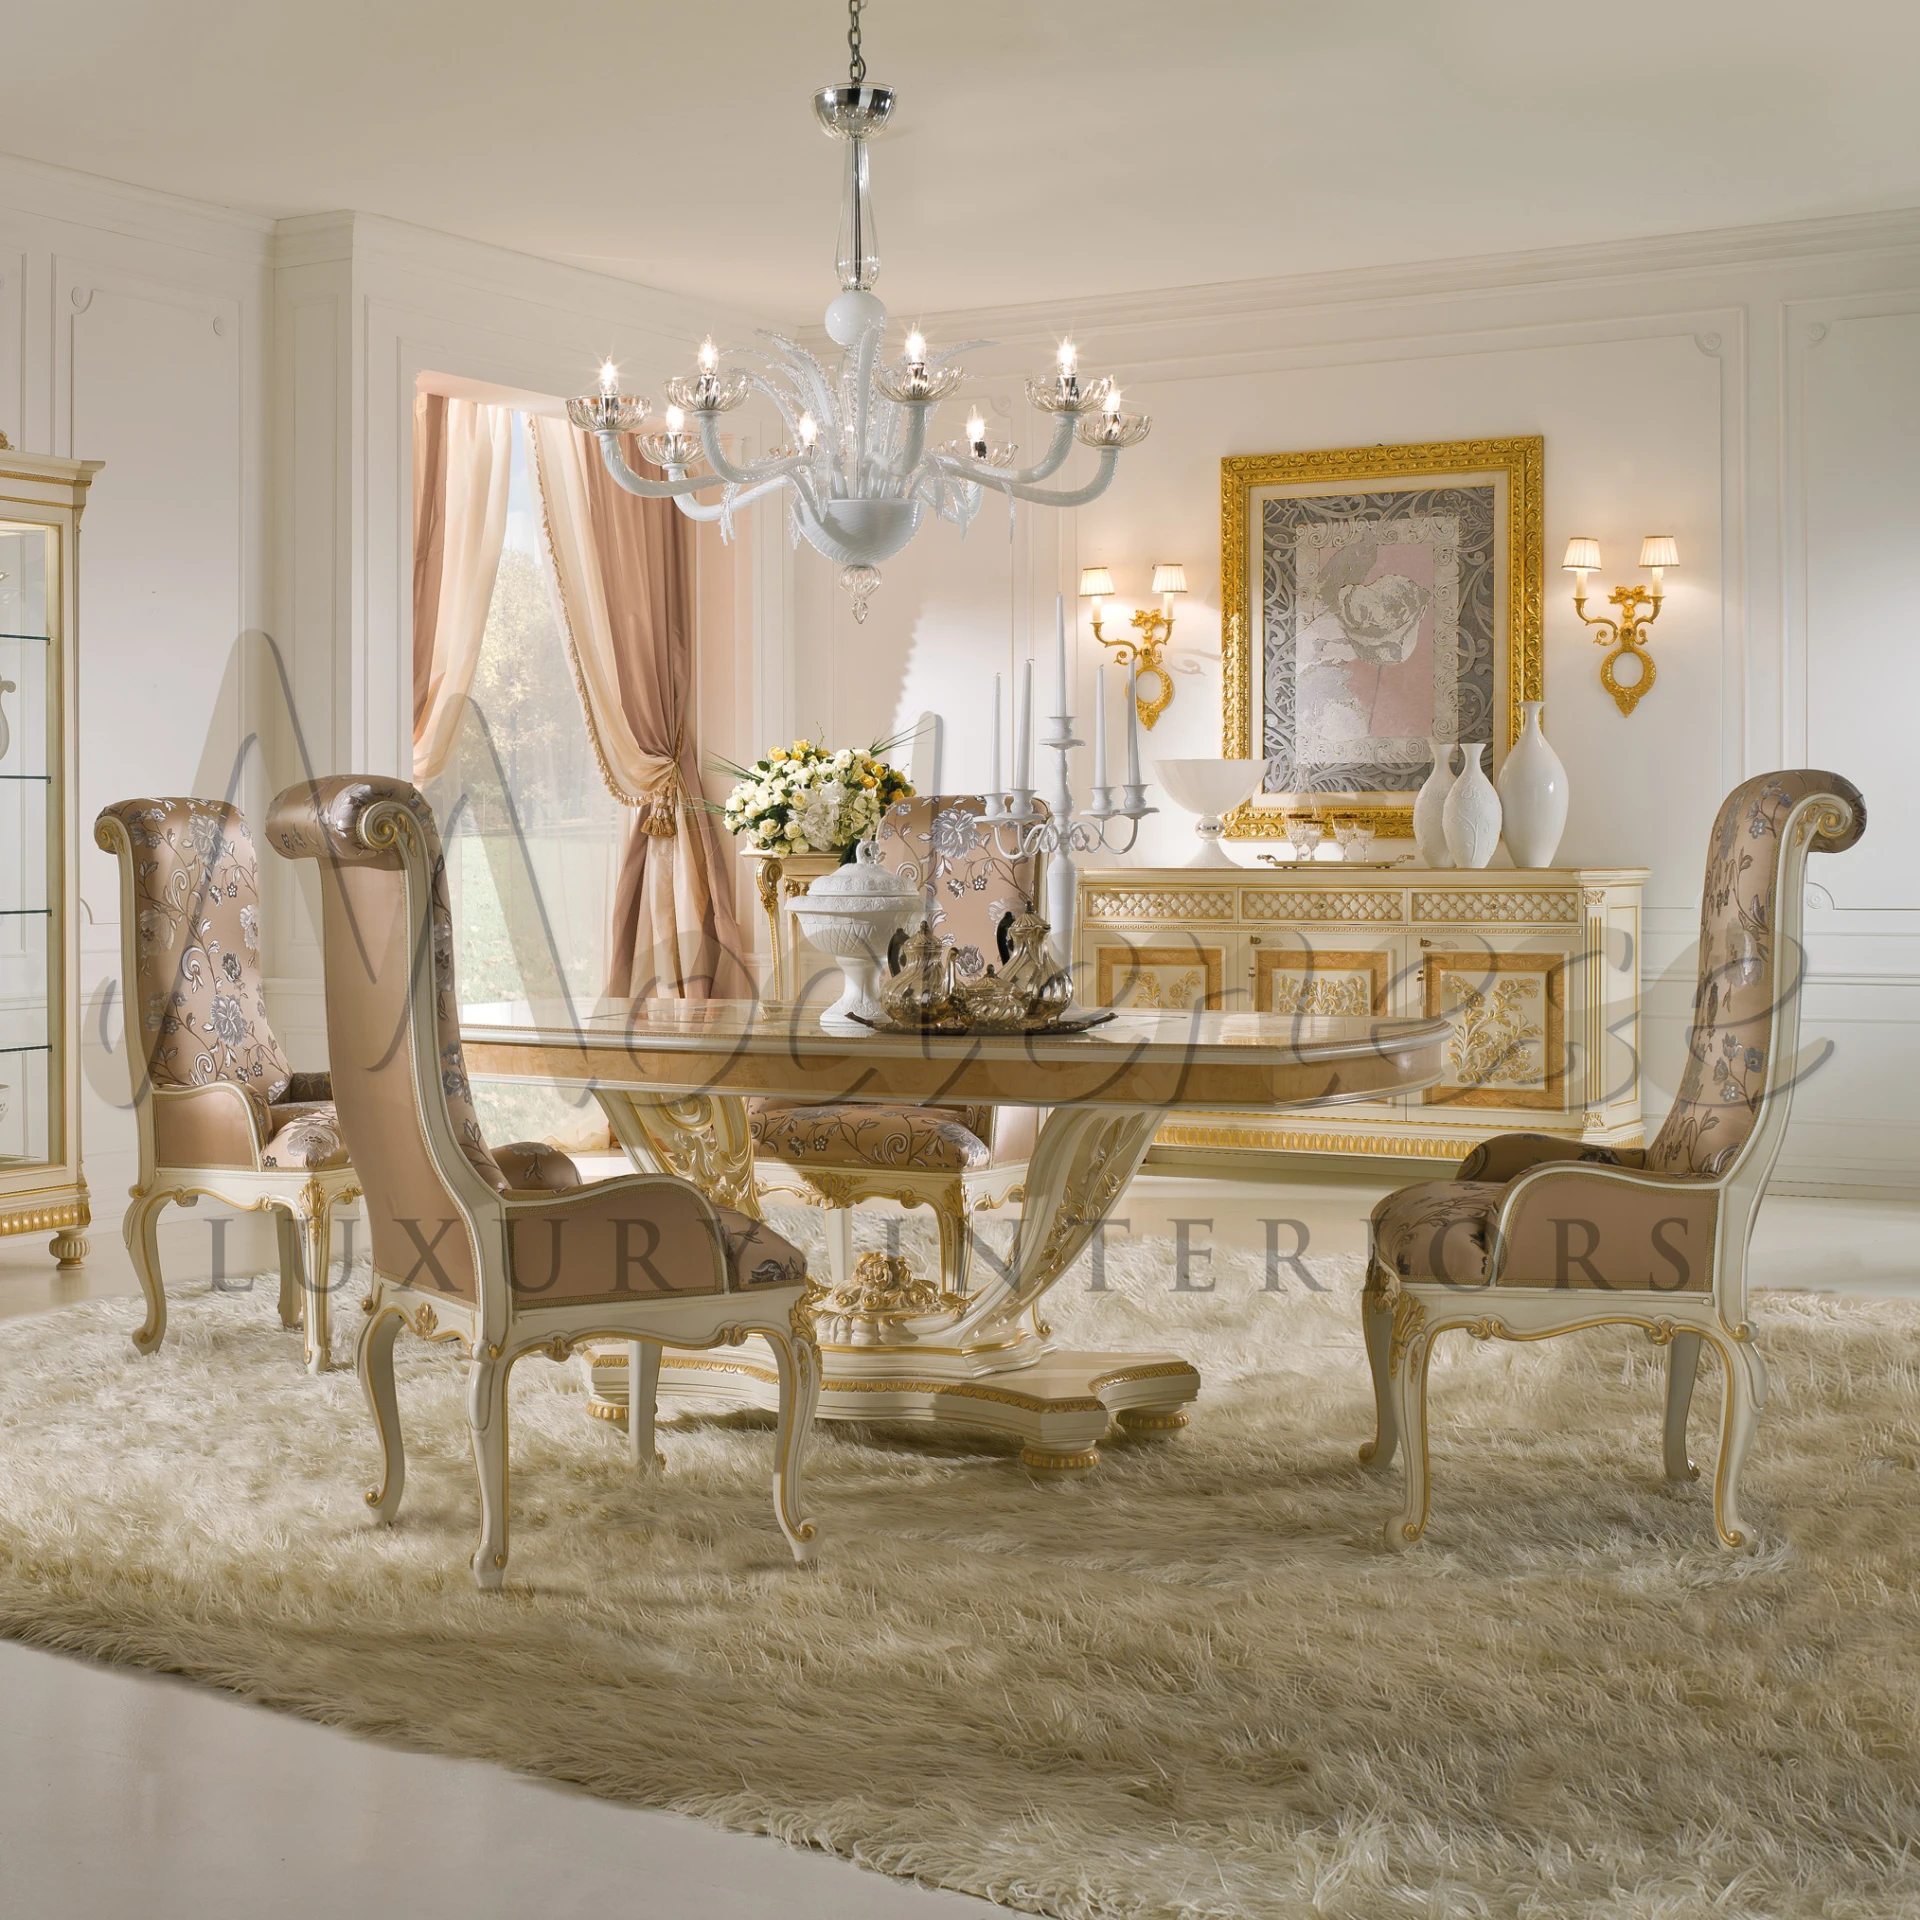 Glass dining table with hand carved chairs with armrests in a classic interior setting.